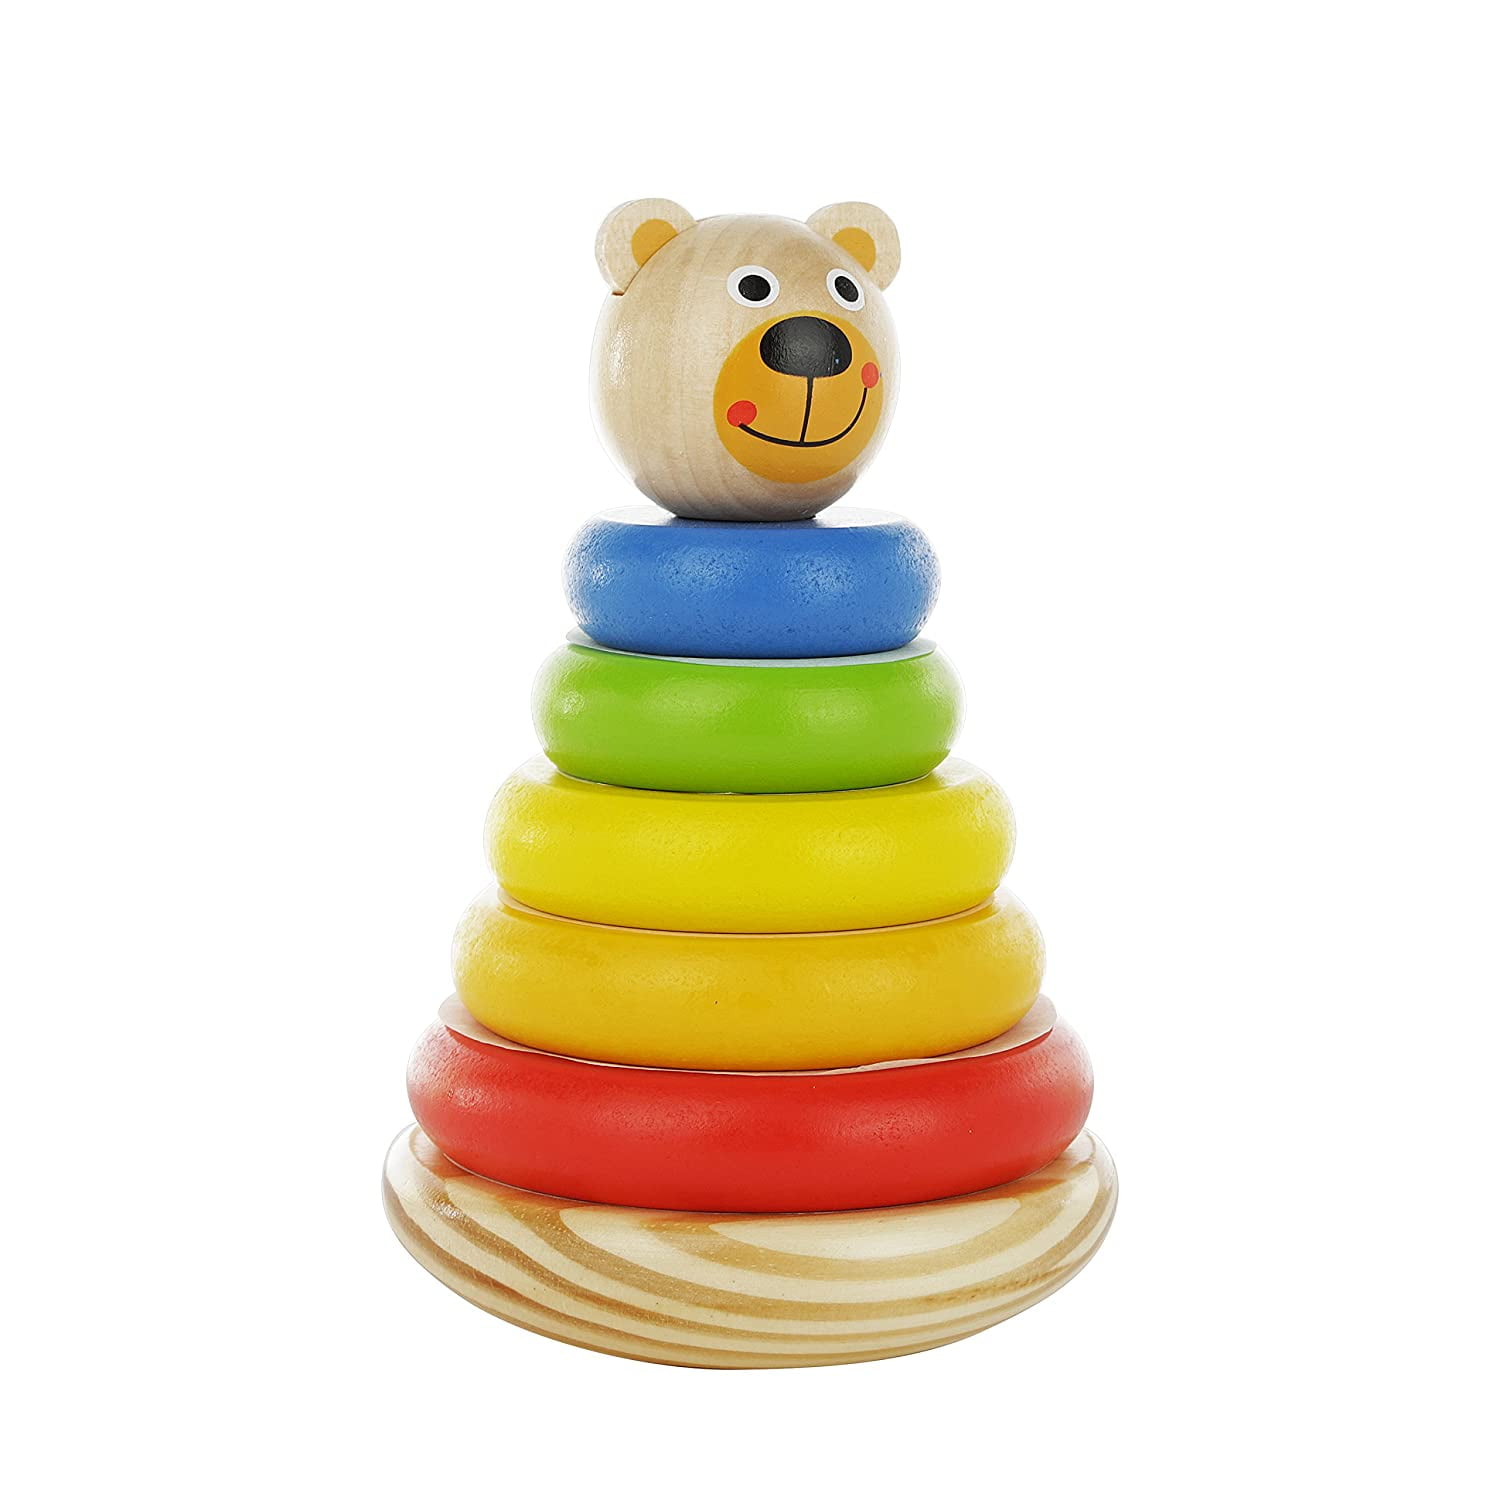 Details about  / Rainbow Stacker Wooden Nesting Stacking Blocks Educational Toy for Baby Toddler